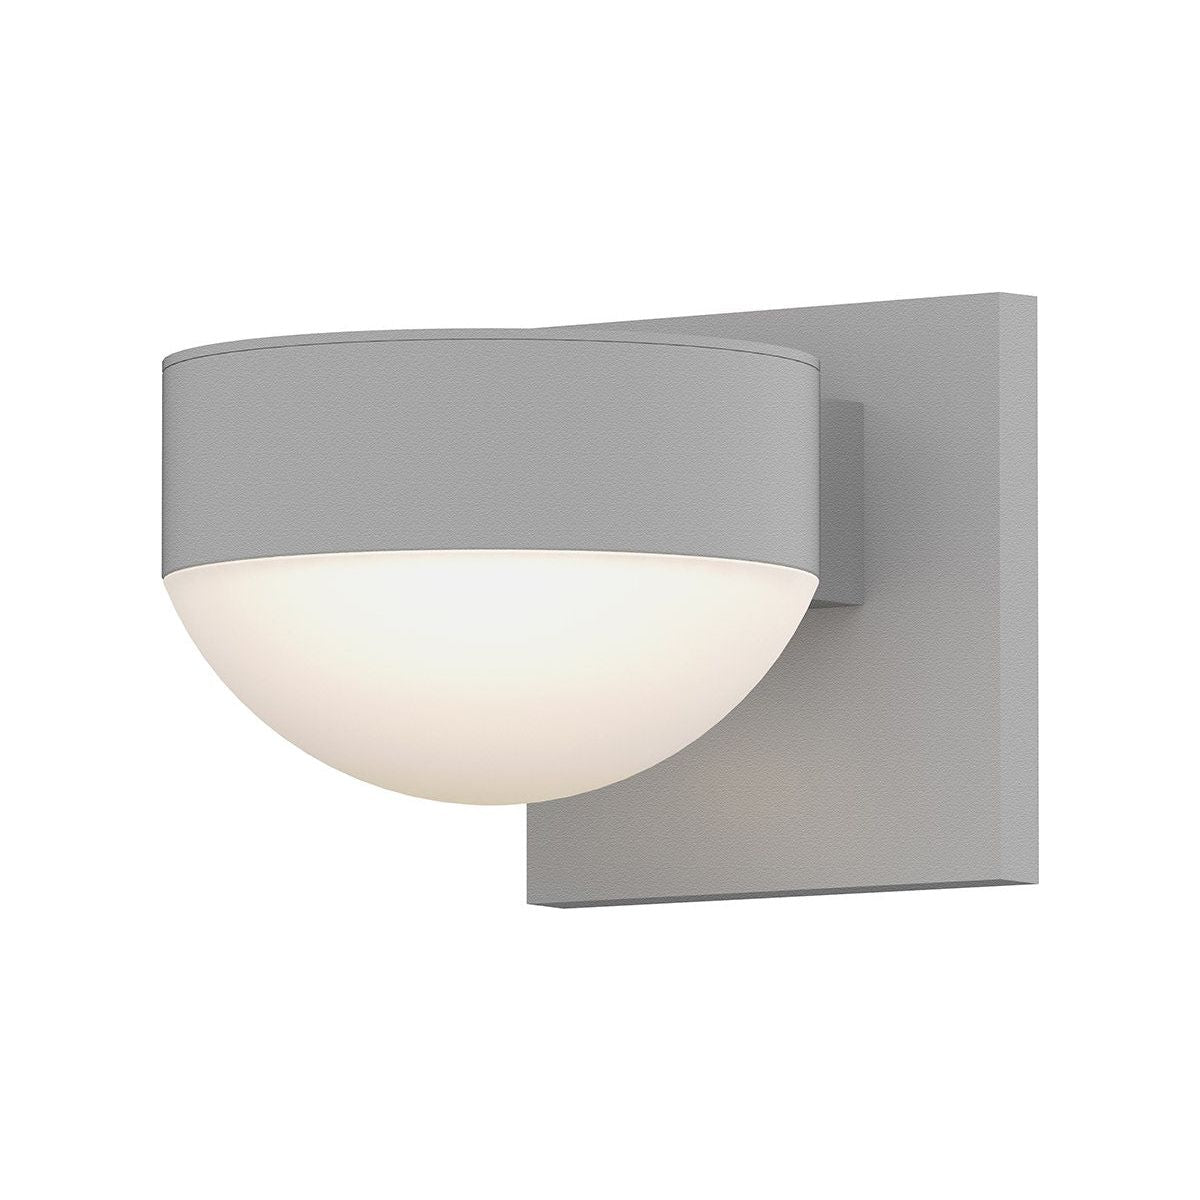 REALS Up/Down LED Sconce with Plate Top and Dome Bottom